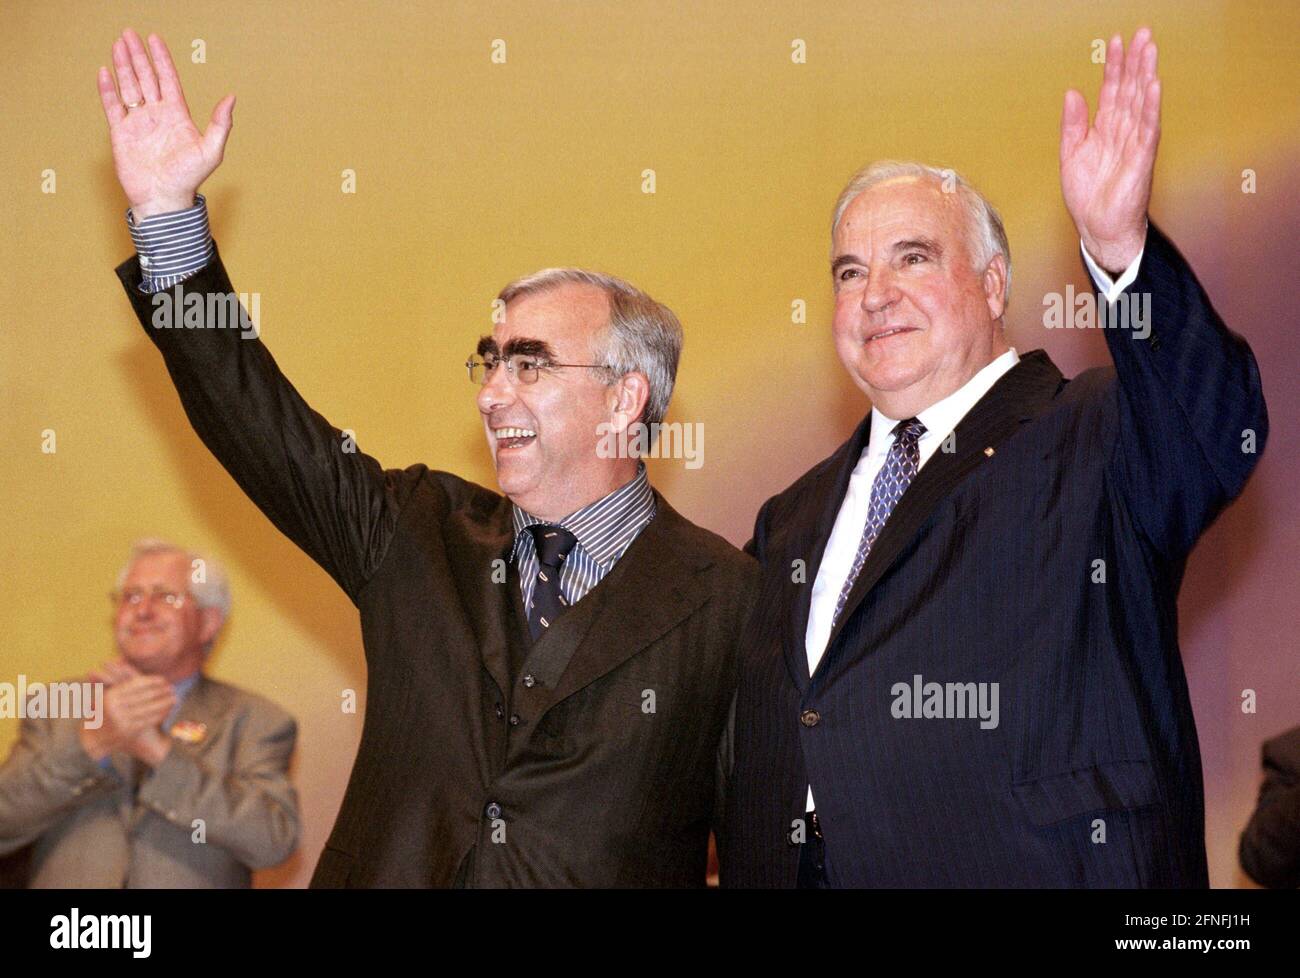 Theo WAIGEL , CSU , and Helmut KOHL , CDU , wave to their supporters at a rally in Dortmund / Wahlkampf / Jubel , 23.08.1998 [automated translation] Stock Photo